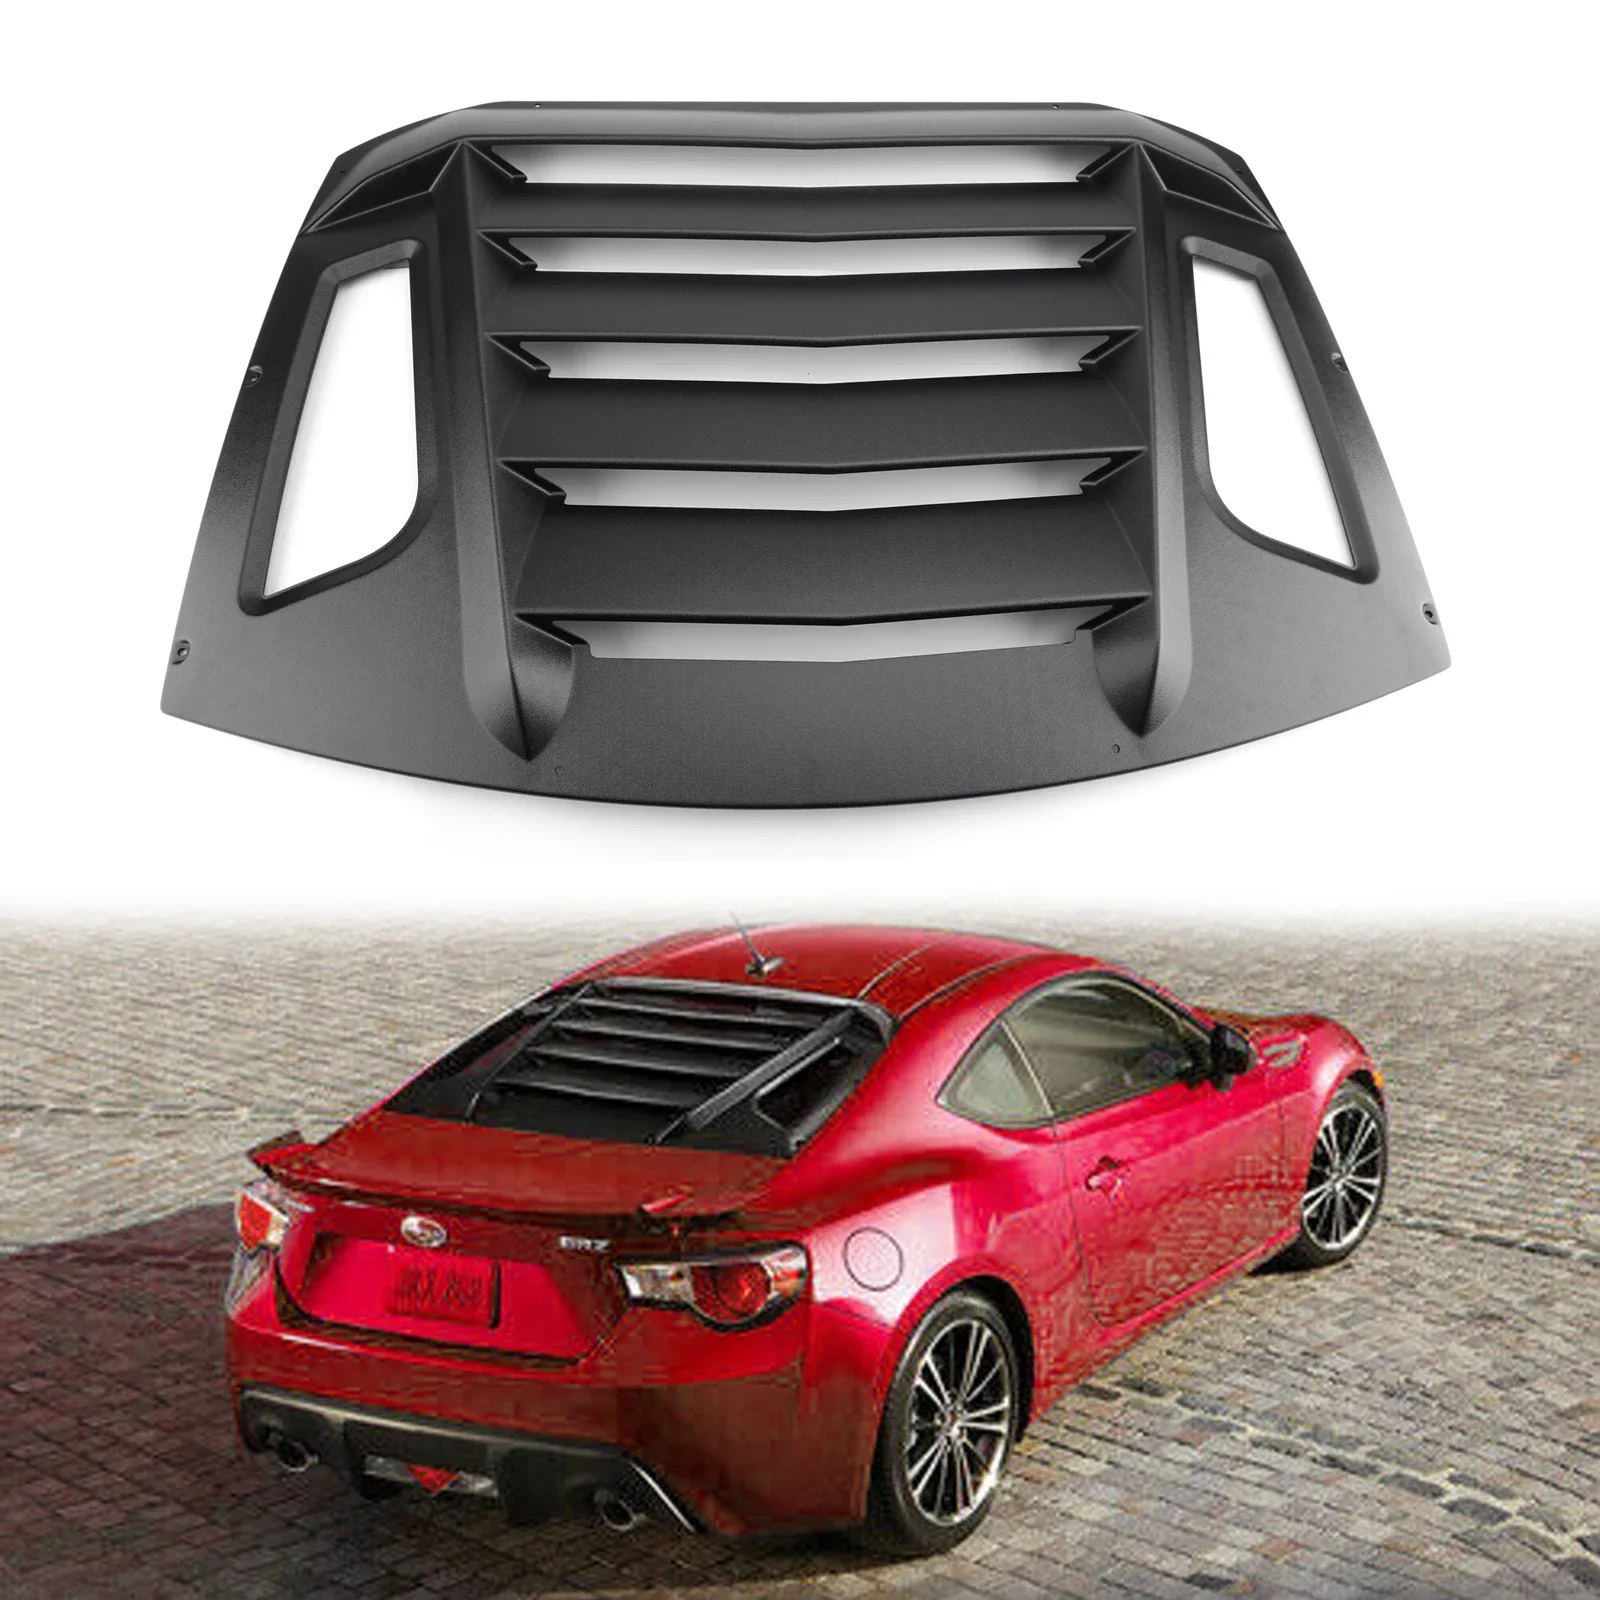 Areyourshop Rear Window Louver Sun Shade Cover For Subaru BRZ/Scion FR-S For  GT86 2013-2018 custom 1set led rear fog lamp assembly for 2013 up subaru brz toyota gt86 scion fr s tail rear lamp brake reverse light